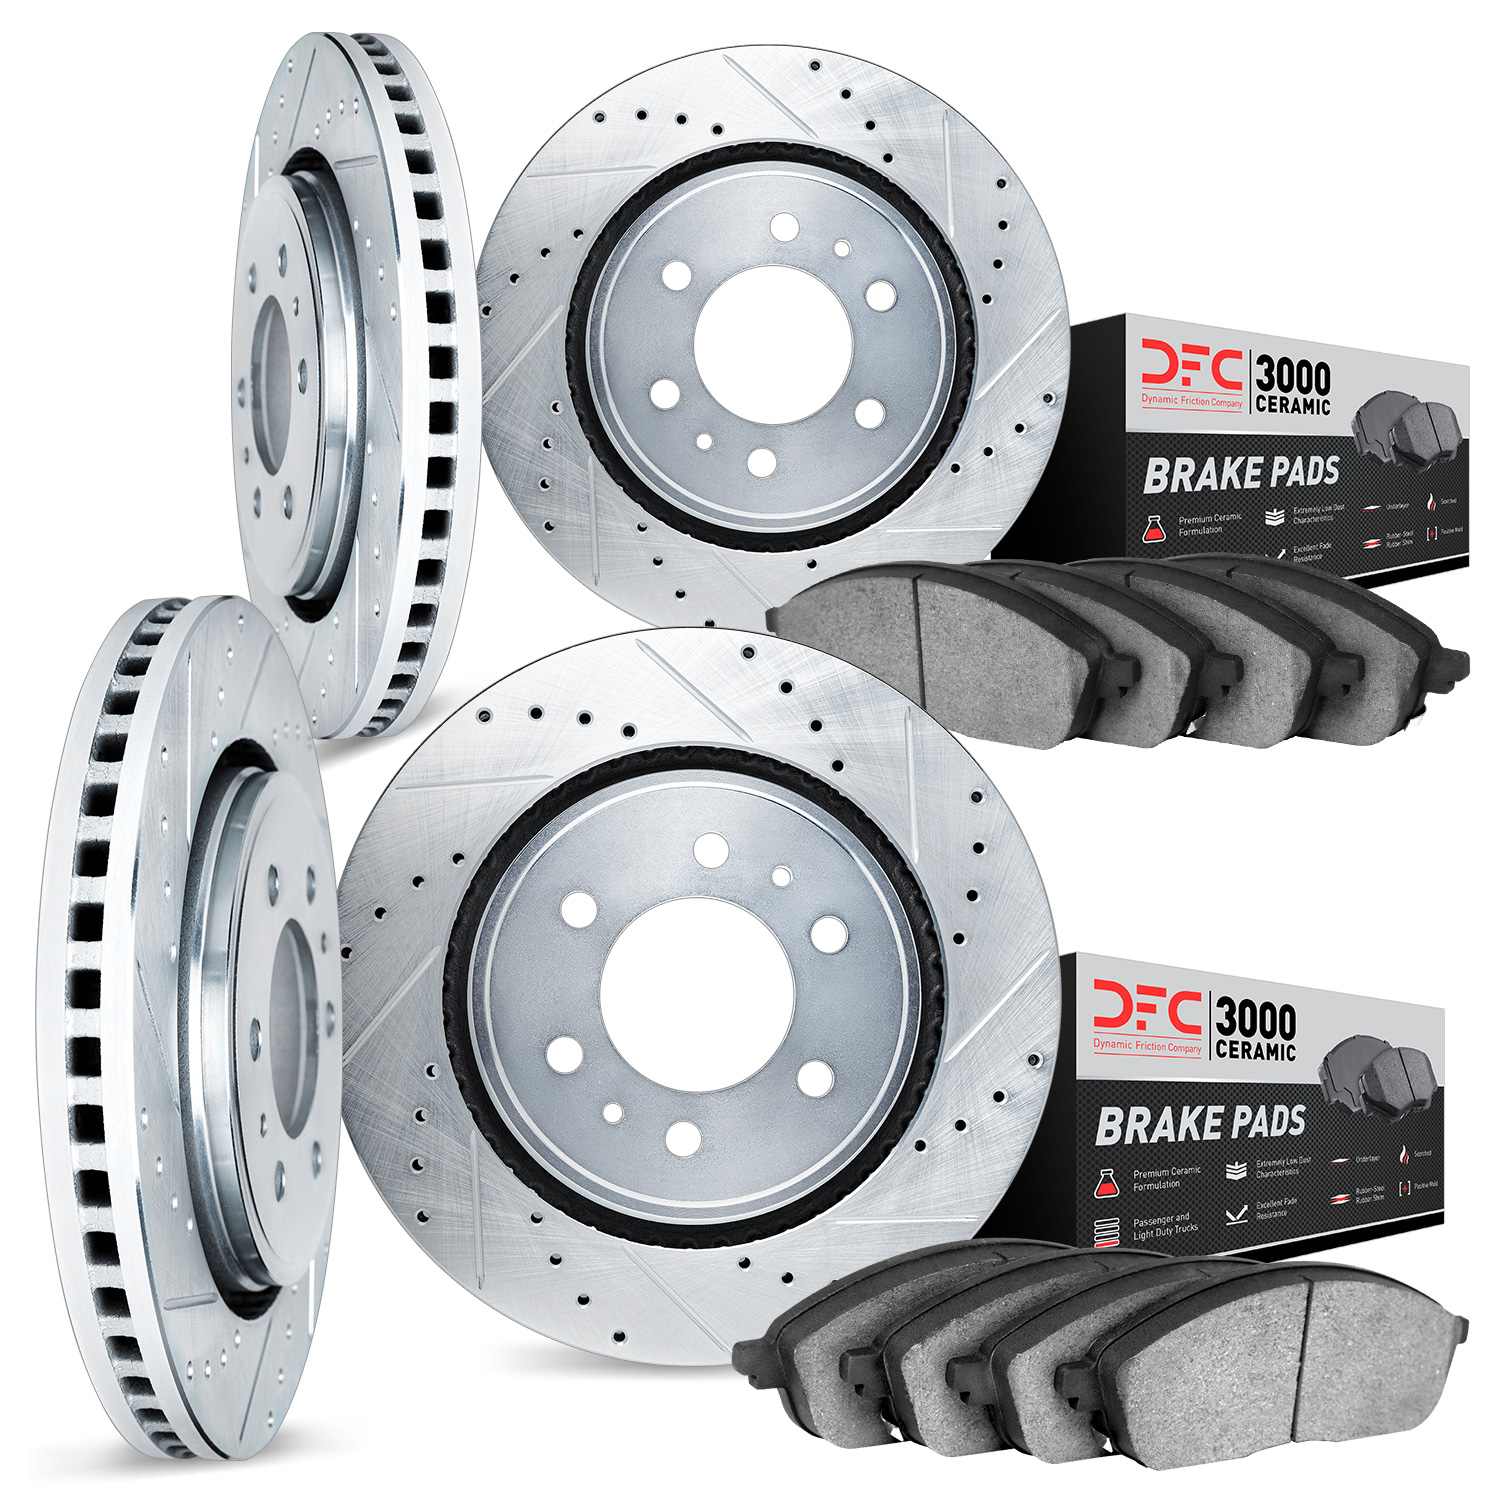 7304-76068 Drilled/Slotted Brake Rotor with 3000-Series Ceramic Brake Pads Kit [Silver], 2010-2014 Lexus/Toyota/Scion, Position: